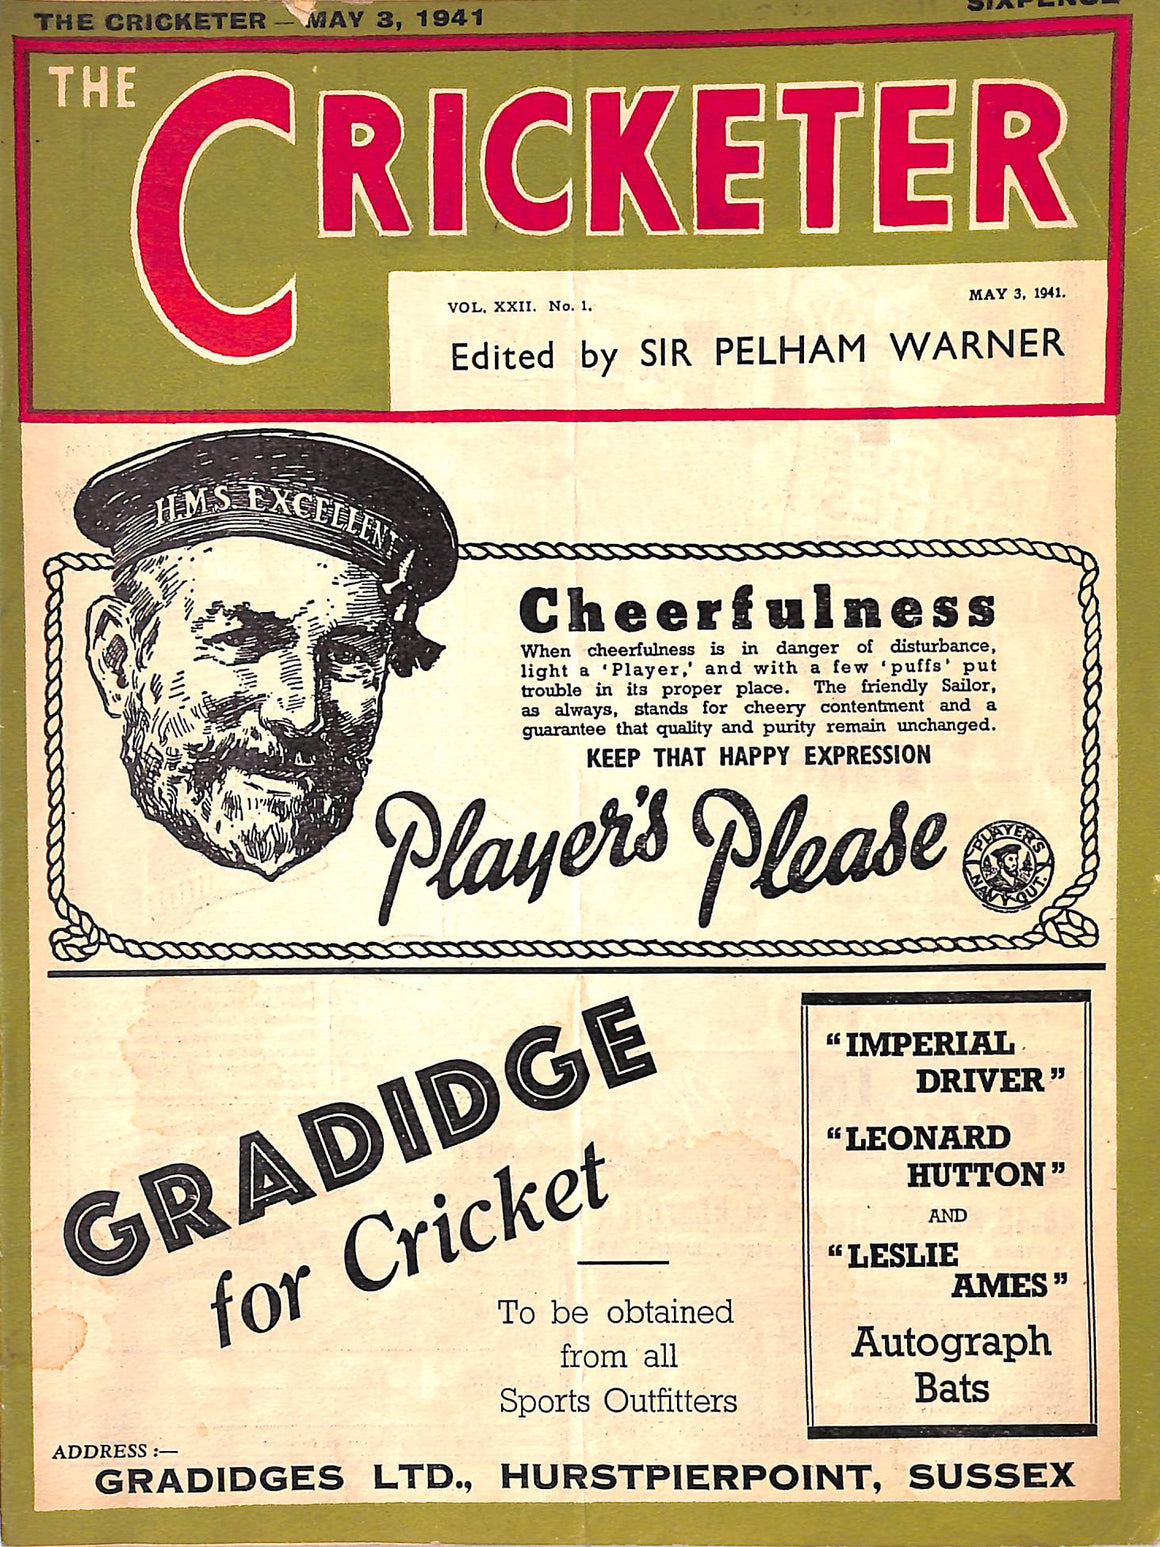 The Cricketer - May 3, 1941